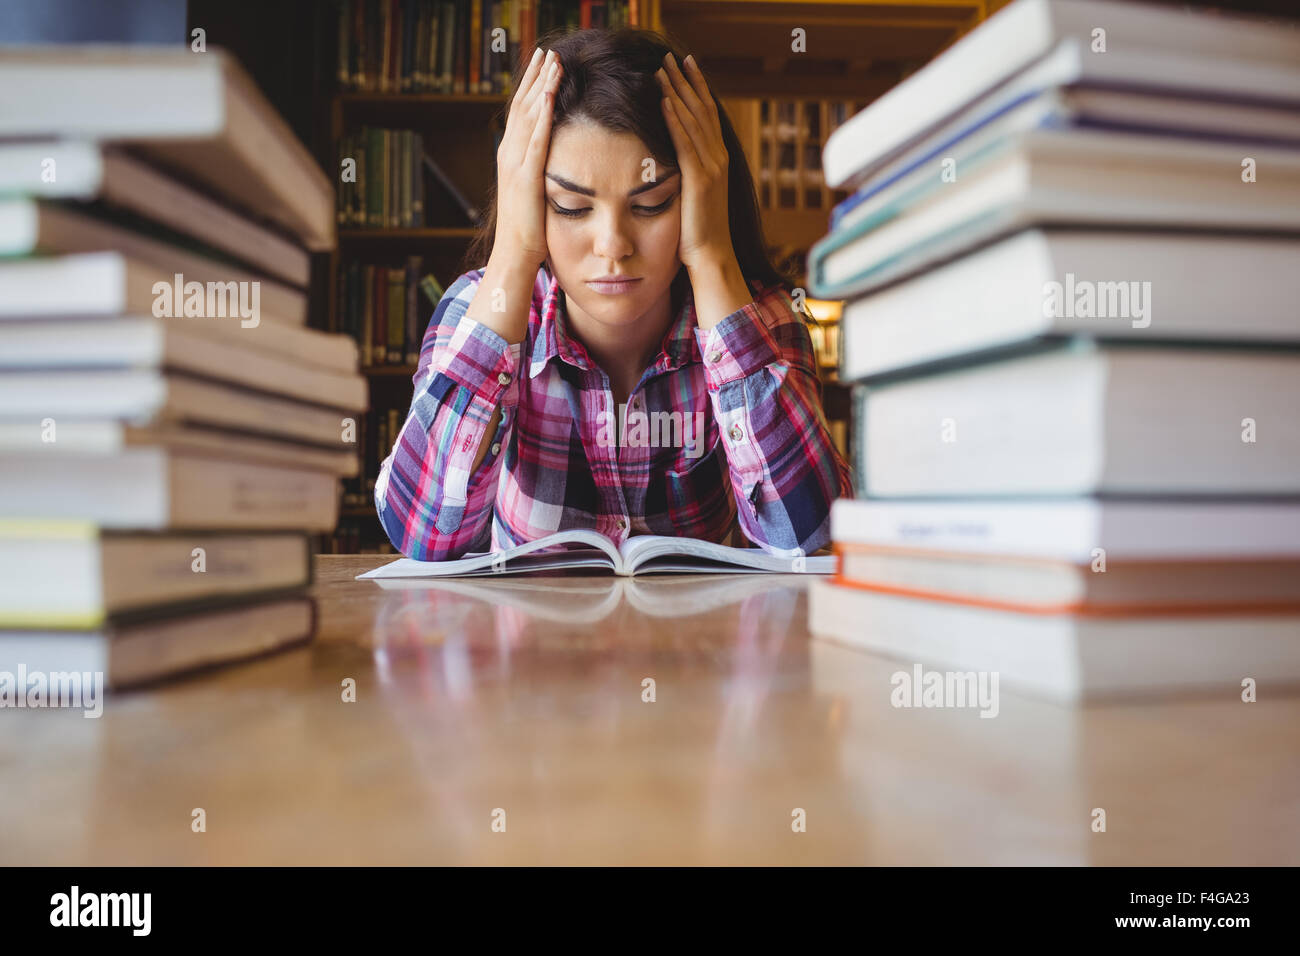 Frustrated female student with book stack Stock Photo